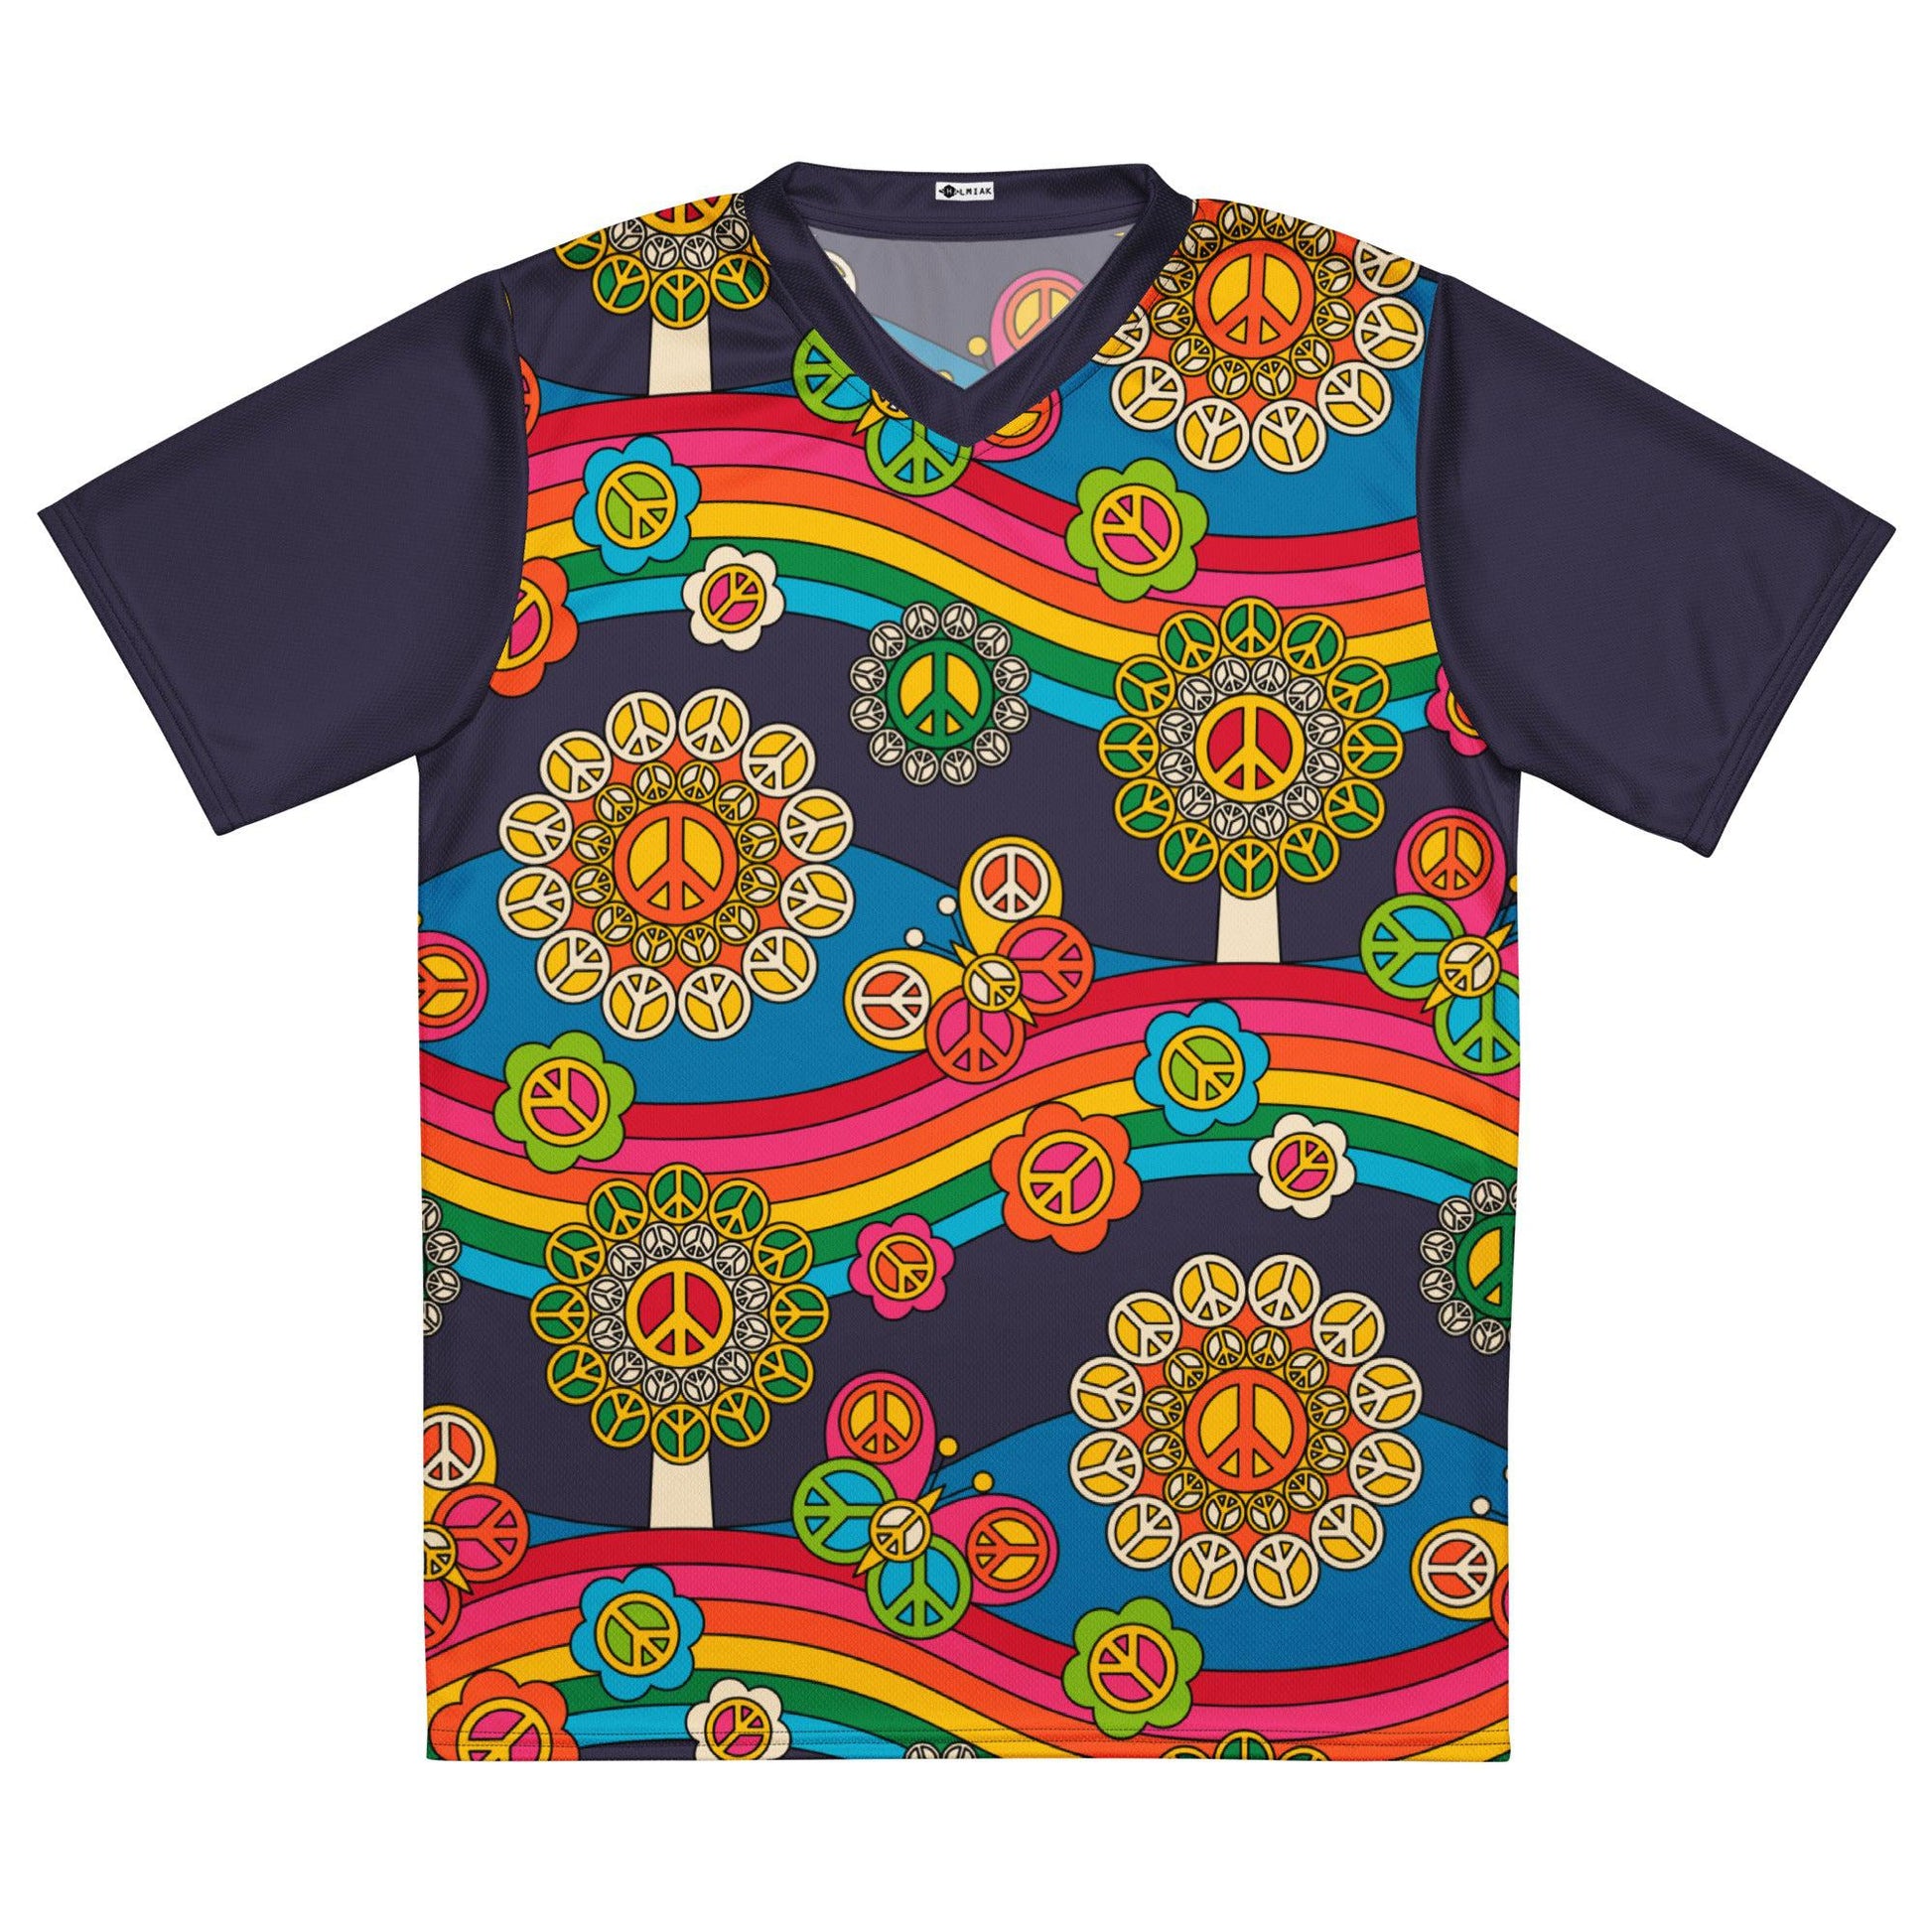 HIPPIE PARK - Recycled unisex sports jersey